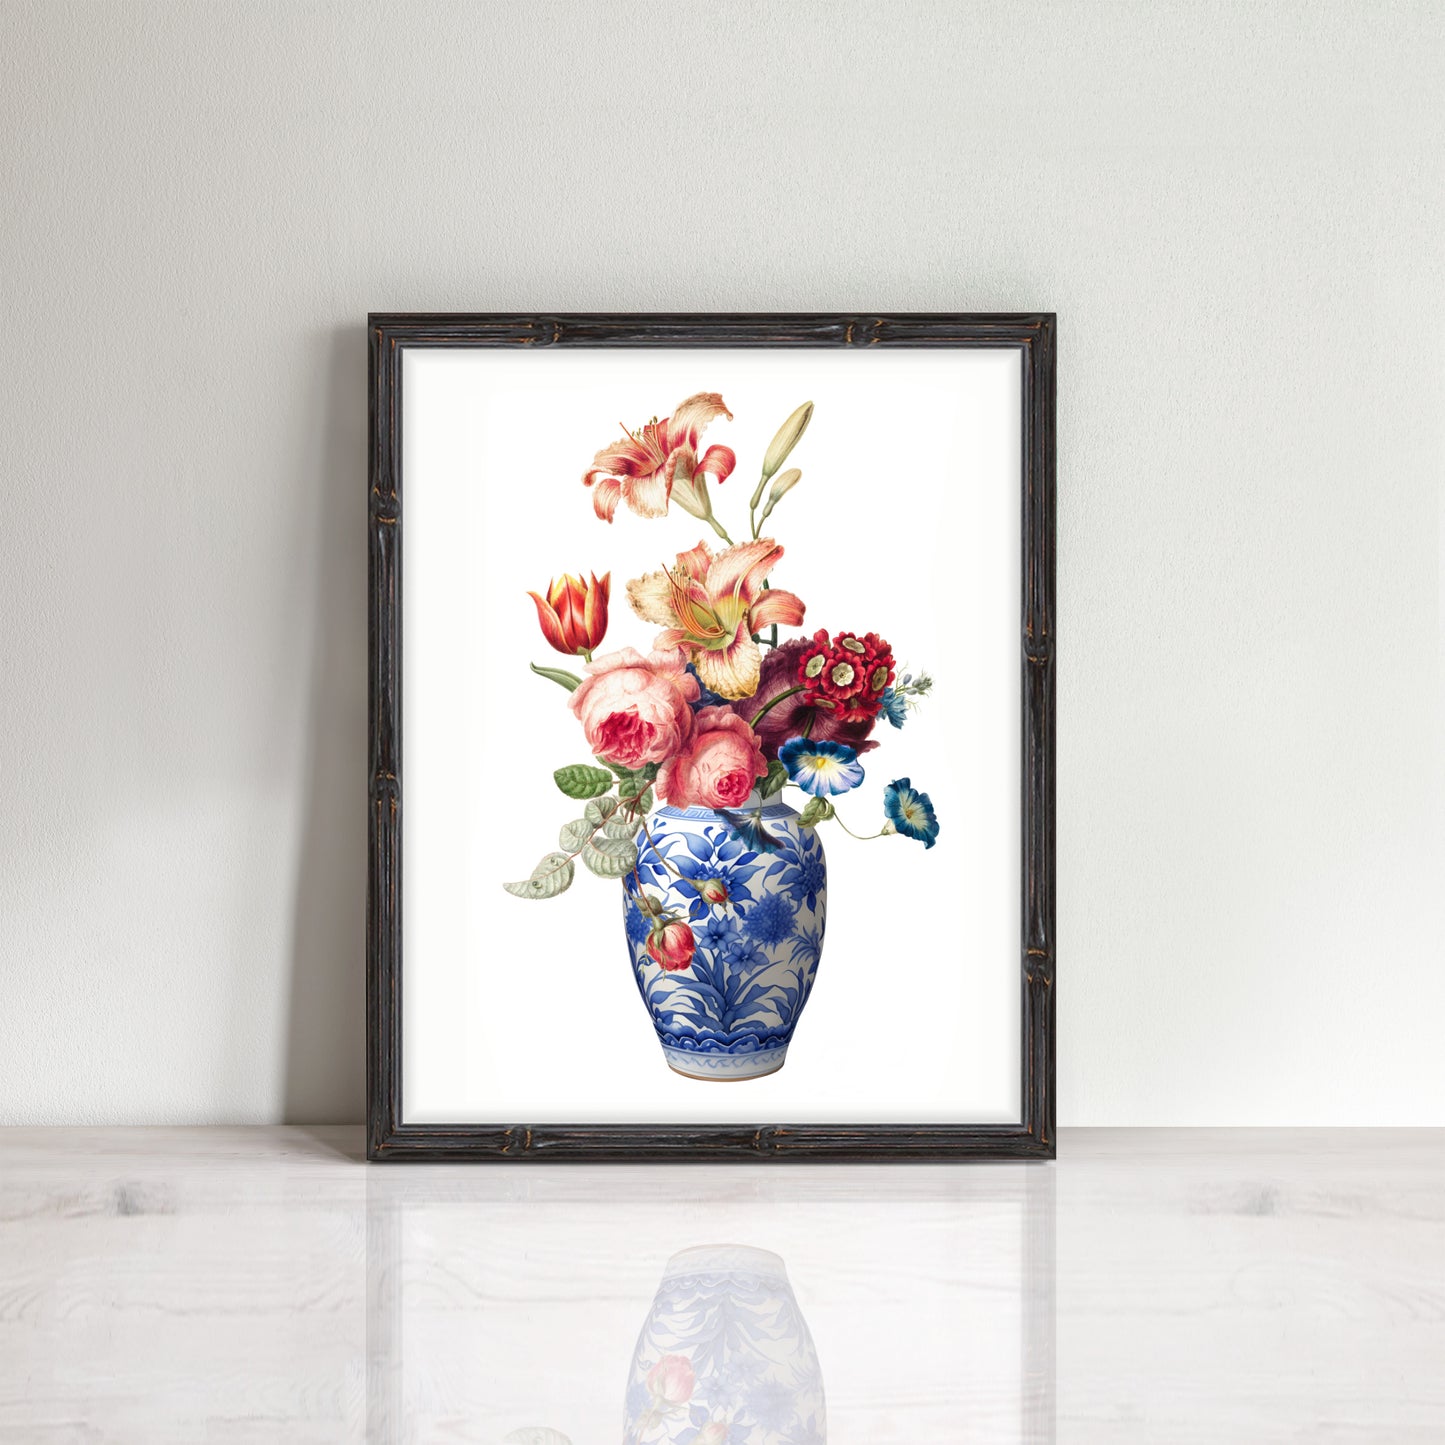 Chinoiserie chic print of a ginger jar with flowers in it